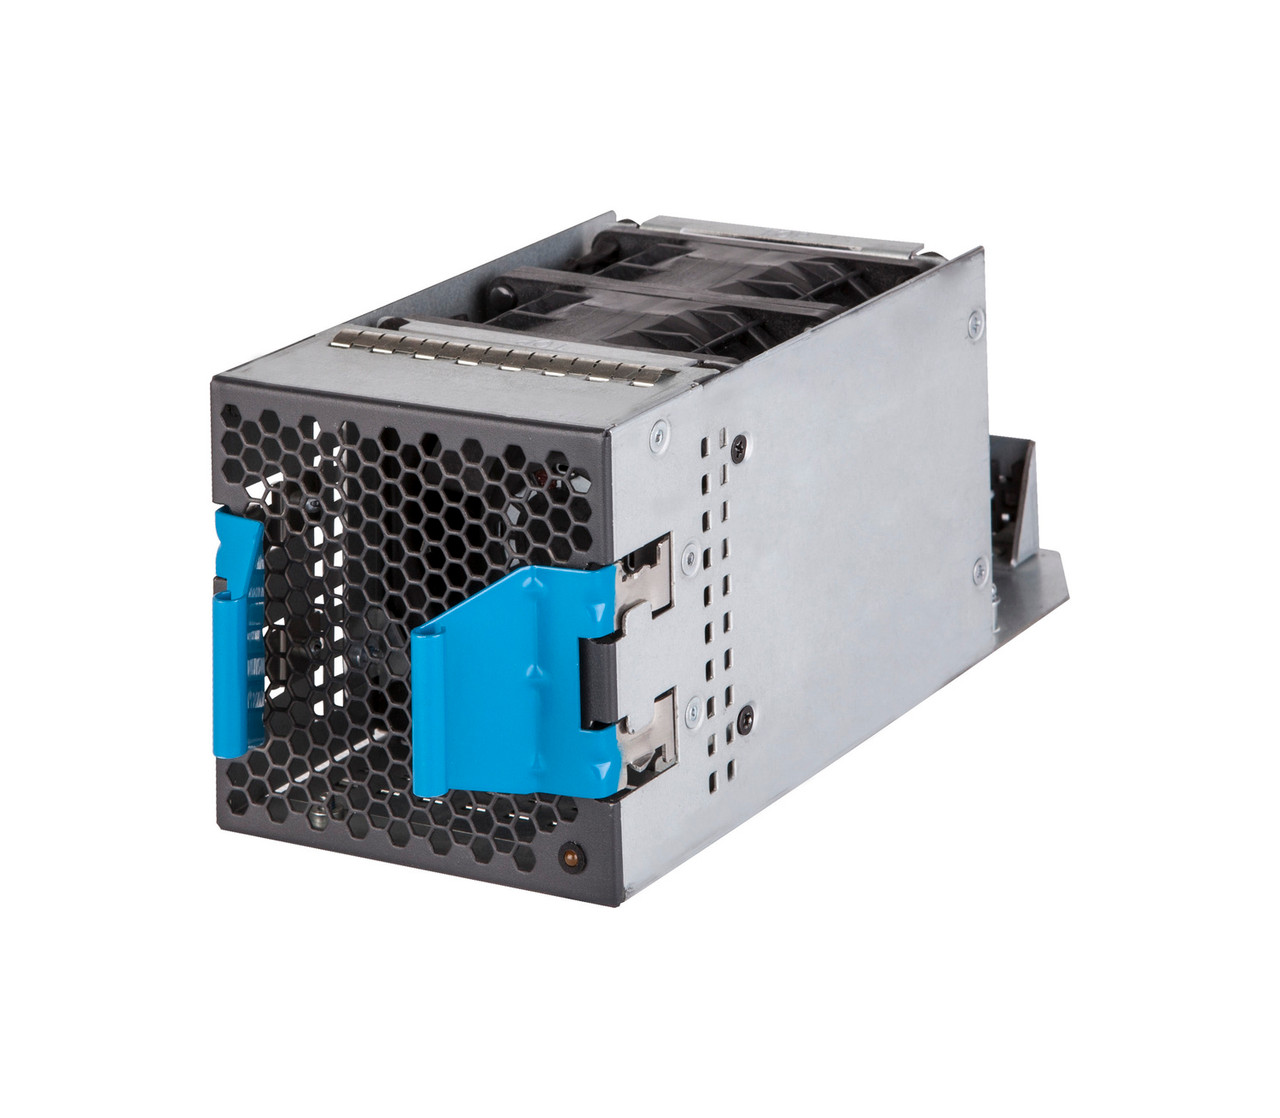 JH185A - HPE 5930 4-slot Back (Power Side) to Front (Port Side) Airflow Fan Tray